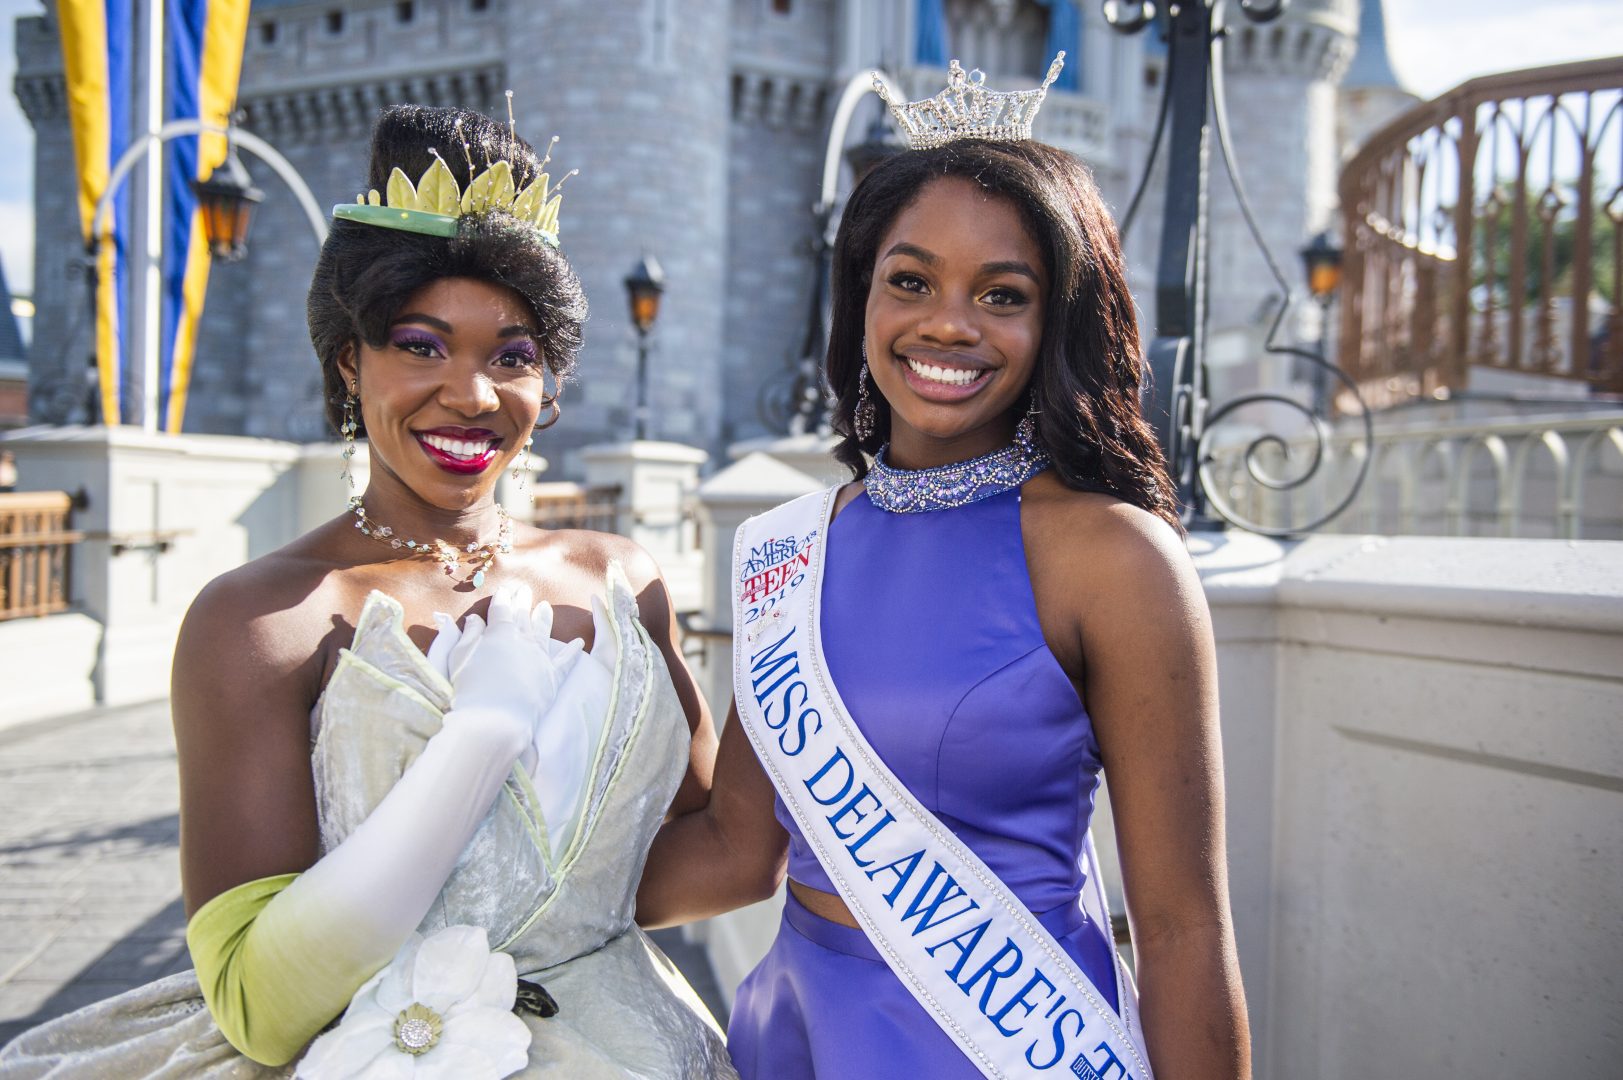 DDA 2019 alumna and Miss Delaware’s Outstanding Teen Jacqueline Means with her favorite Disney character, Princess Tiana, at the Magic Kingdom Park. (Photo by Abigail Nilsson)